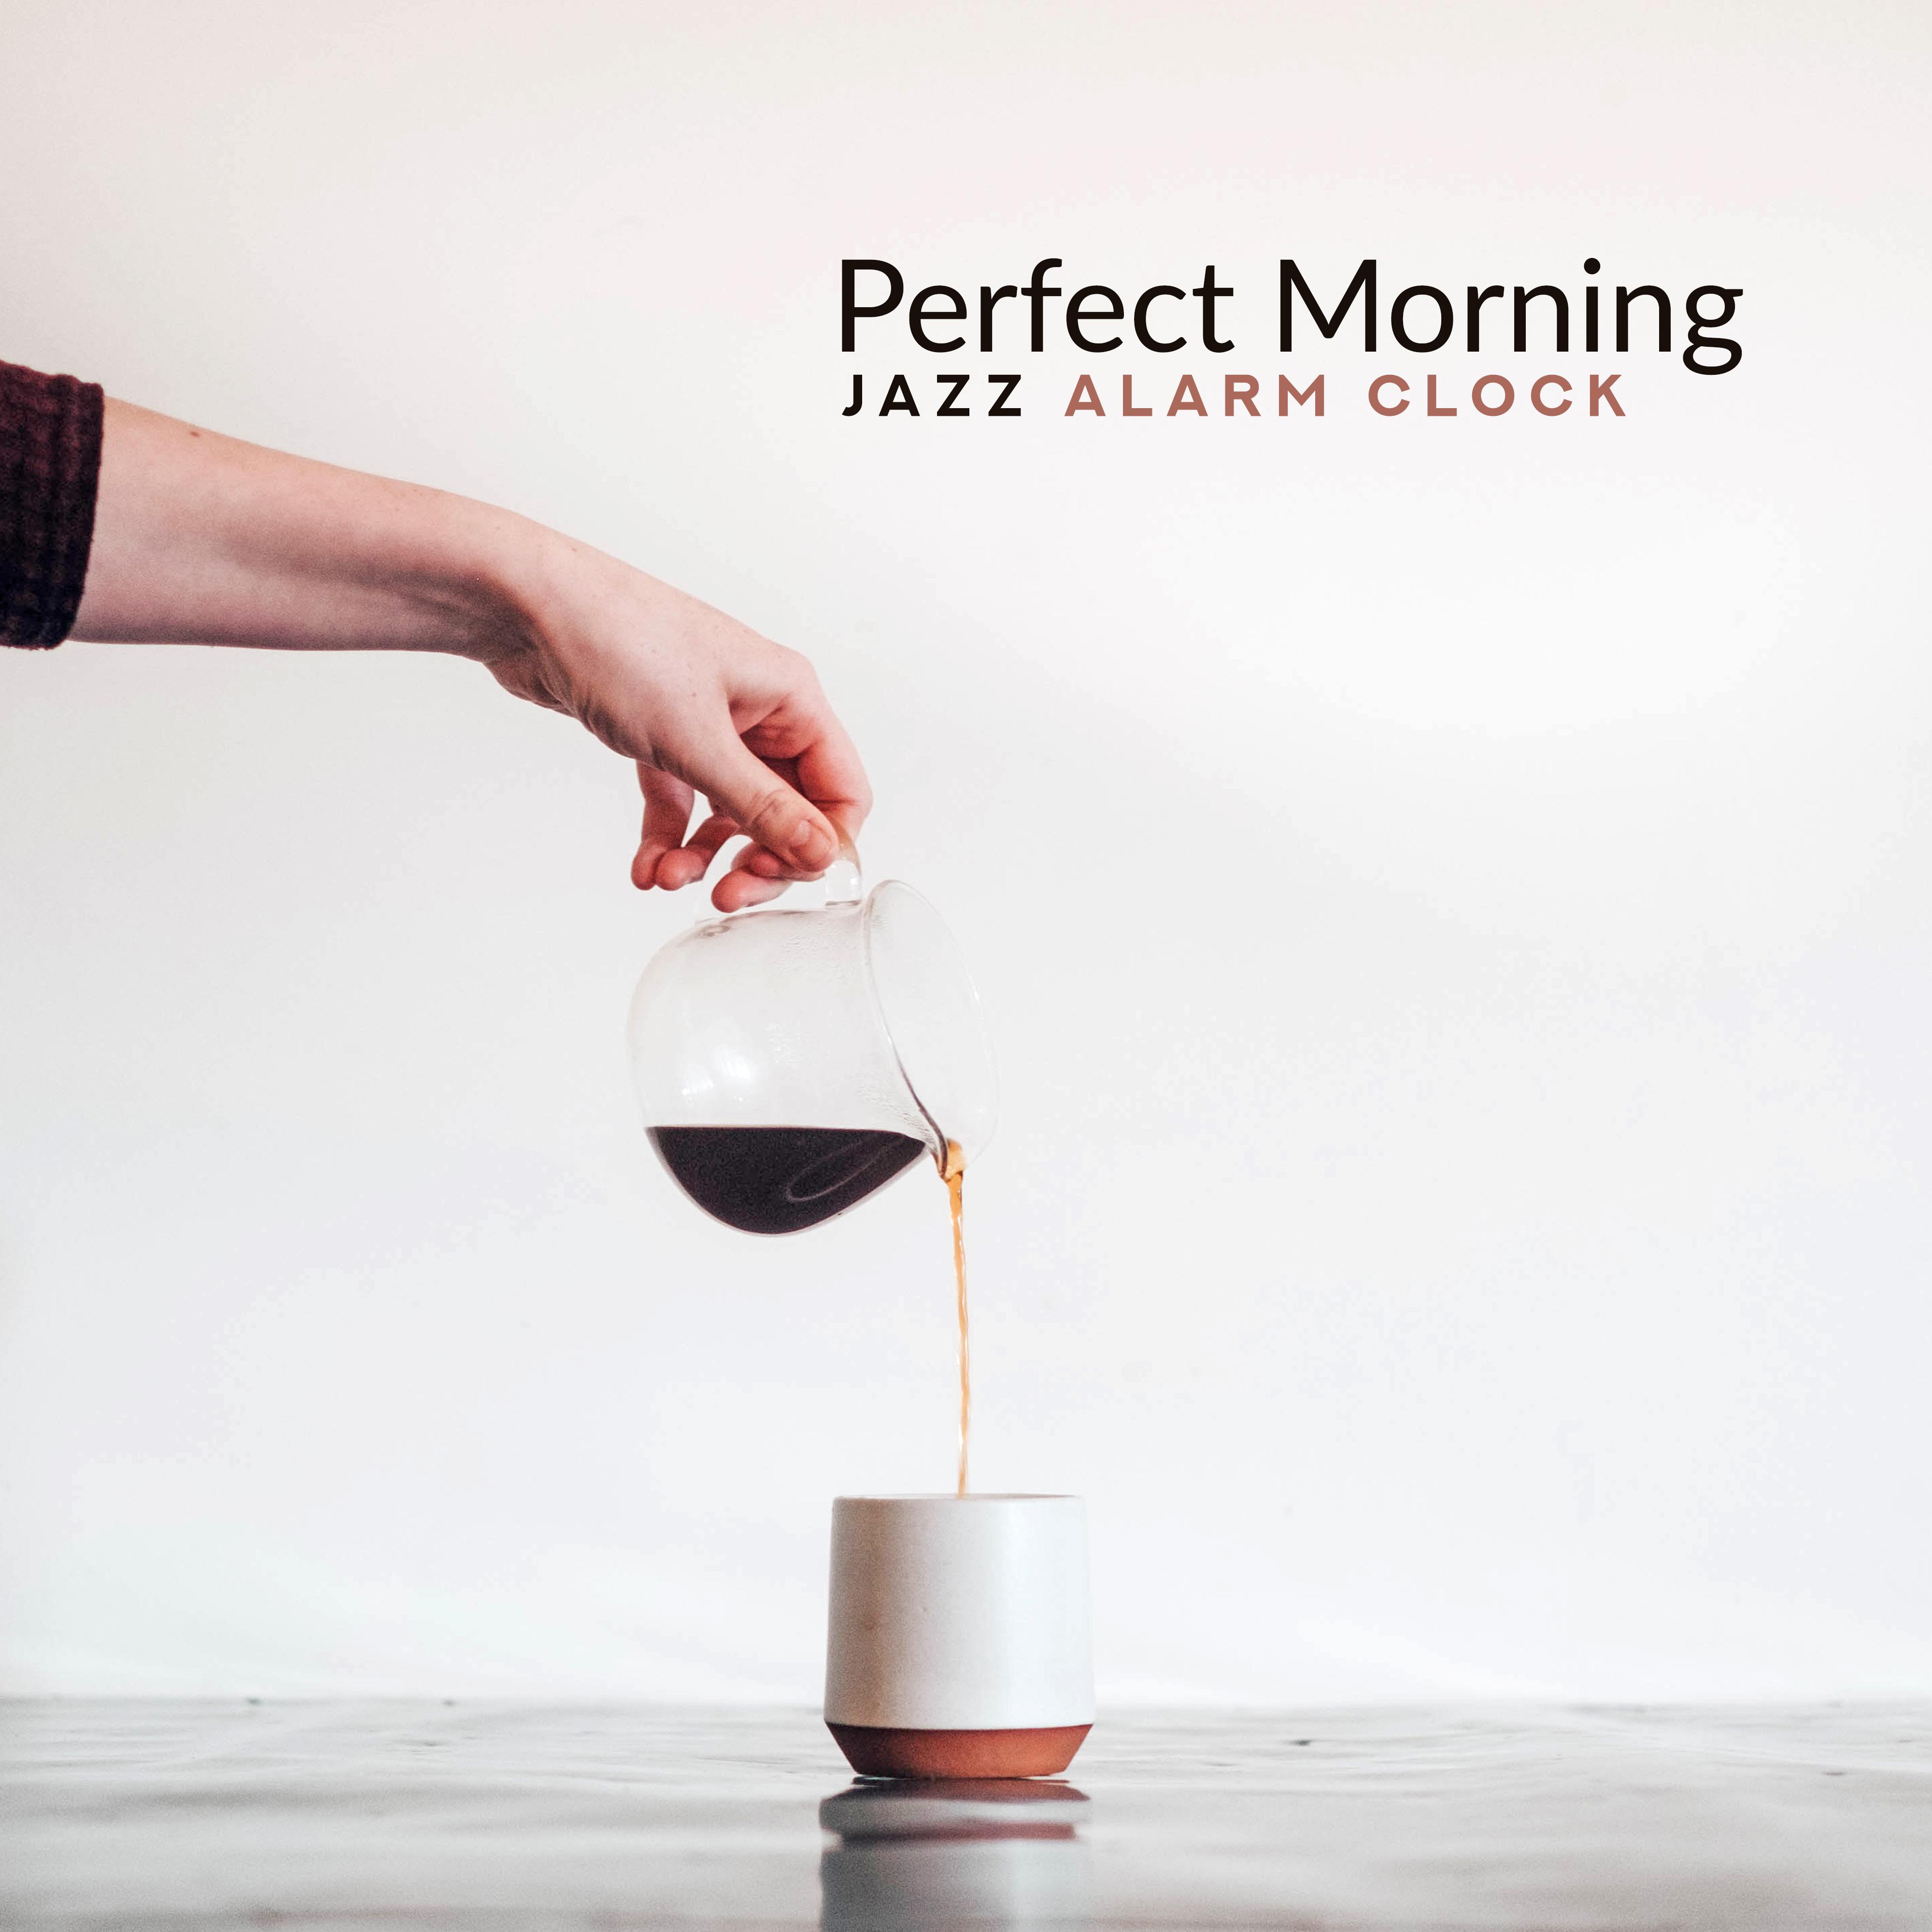 Perfect Morning Jazz Alarm Clock: 15 Positive Instrumental Jazz Songs for Start a Day with Tasty Breakfast, Good Mood & Full of Energy